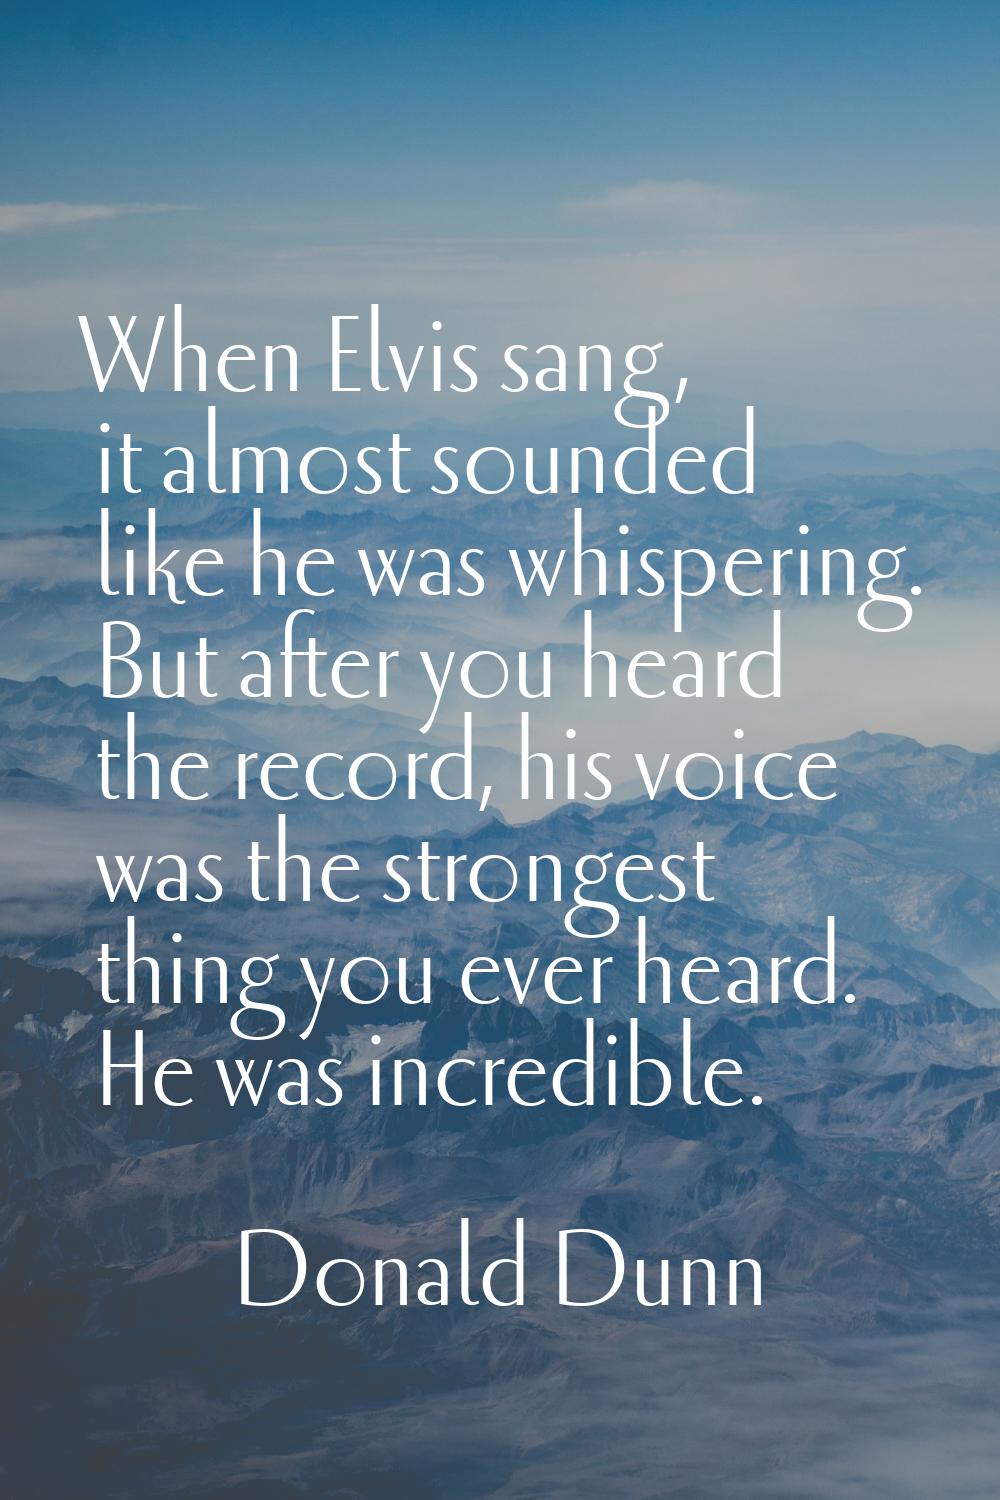 When Elvis sang, it almost sounded like he was whispering. But after you heard the record, his voic